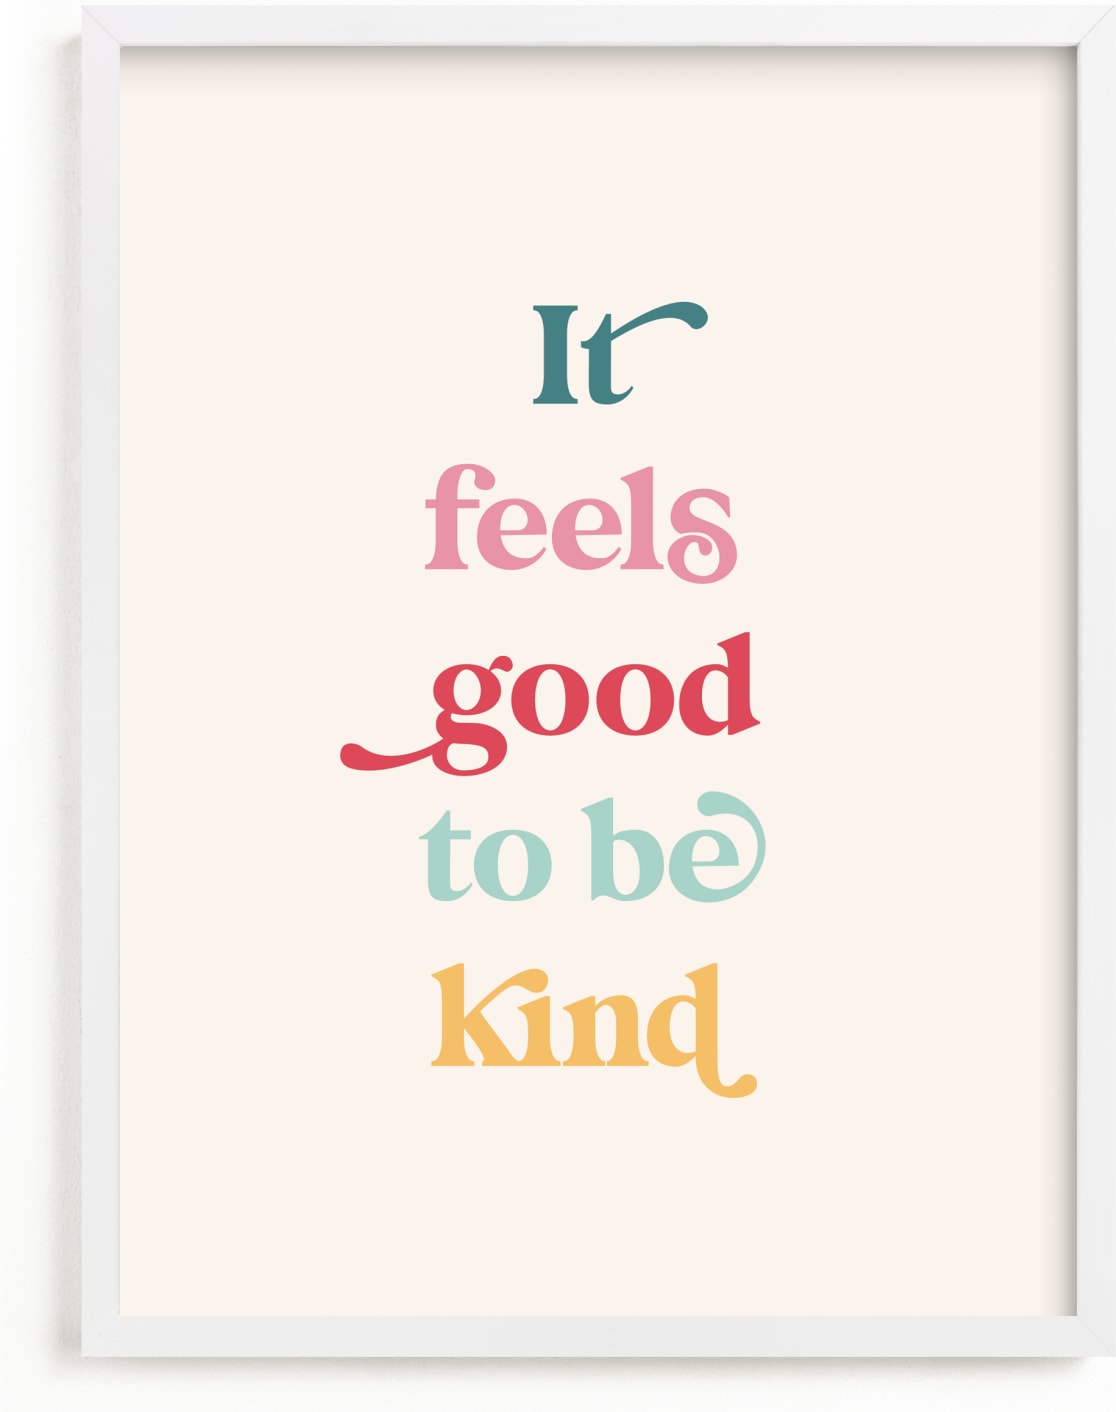 This is a colorful kids wall art by Leah Ragain called It feels good to be kind.